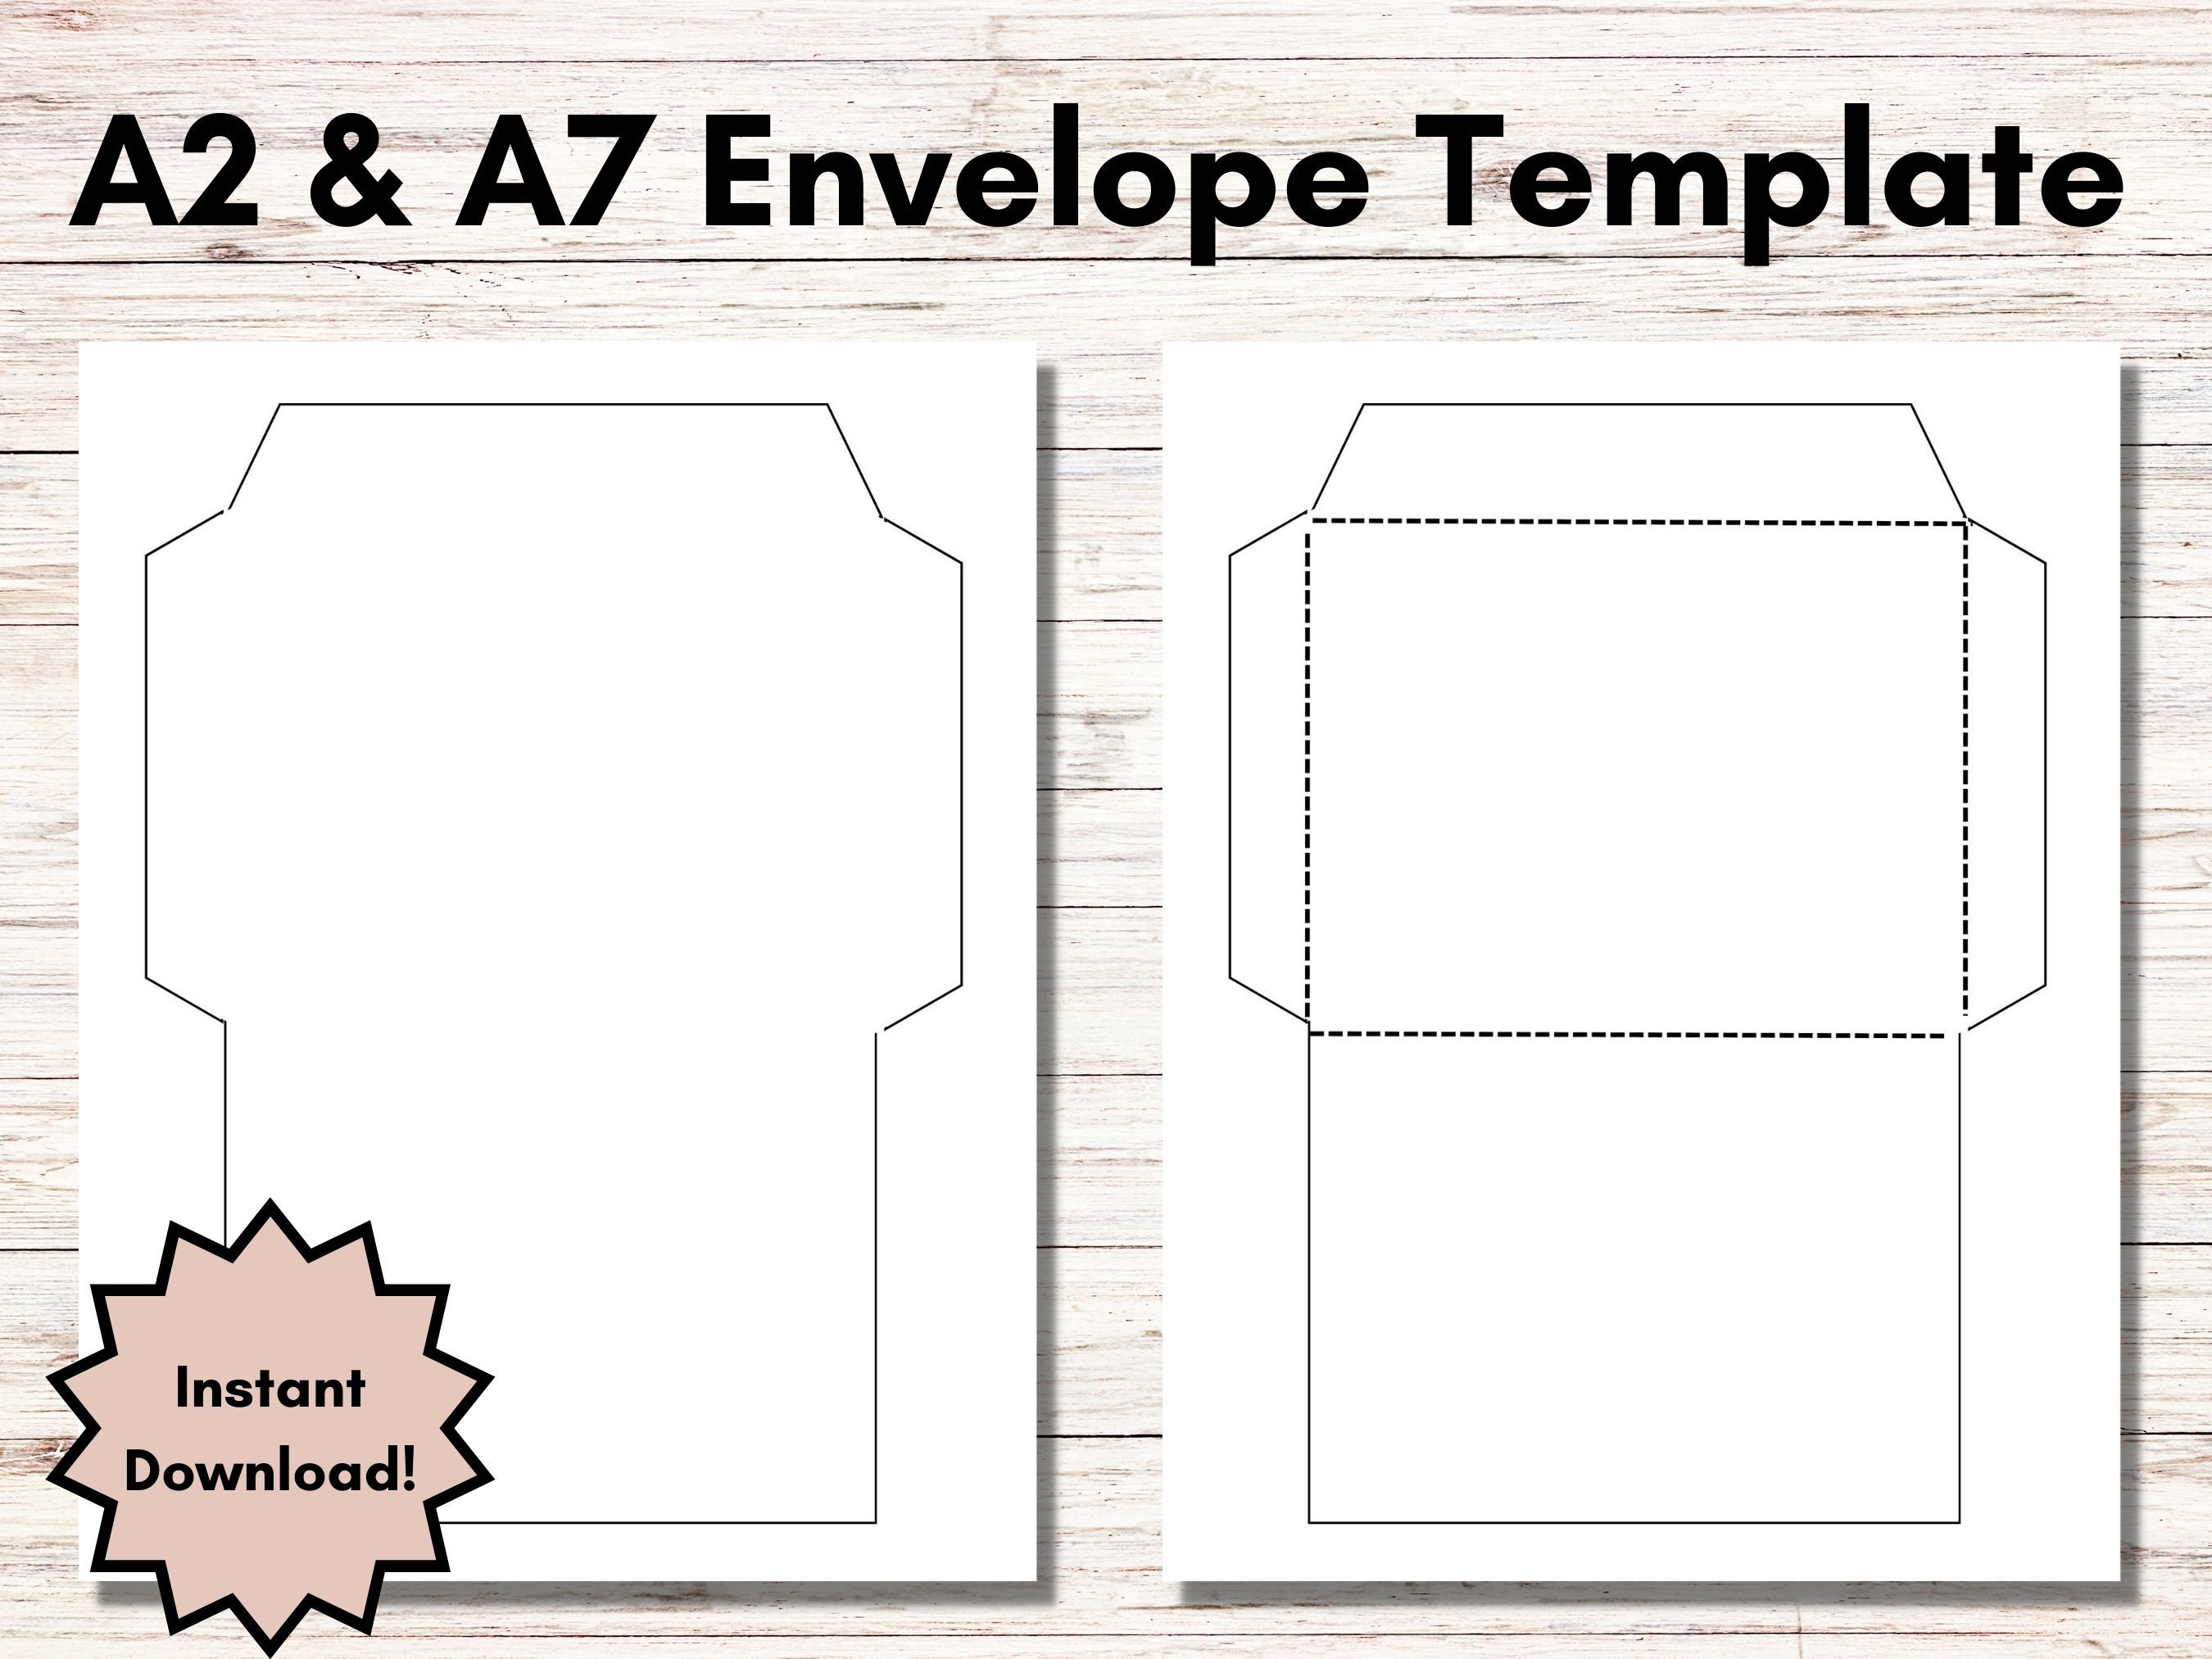 Printable Envelope Liner, A7, Euro Flap, Square Flap, 6.5 Square, A6, 5.75  Square, 4 Bar, 4 Bar for 5x7 Wedding Invitations, Toile Sage